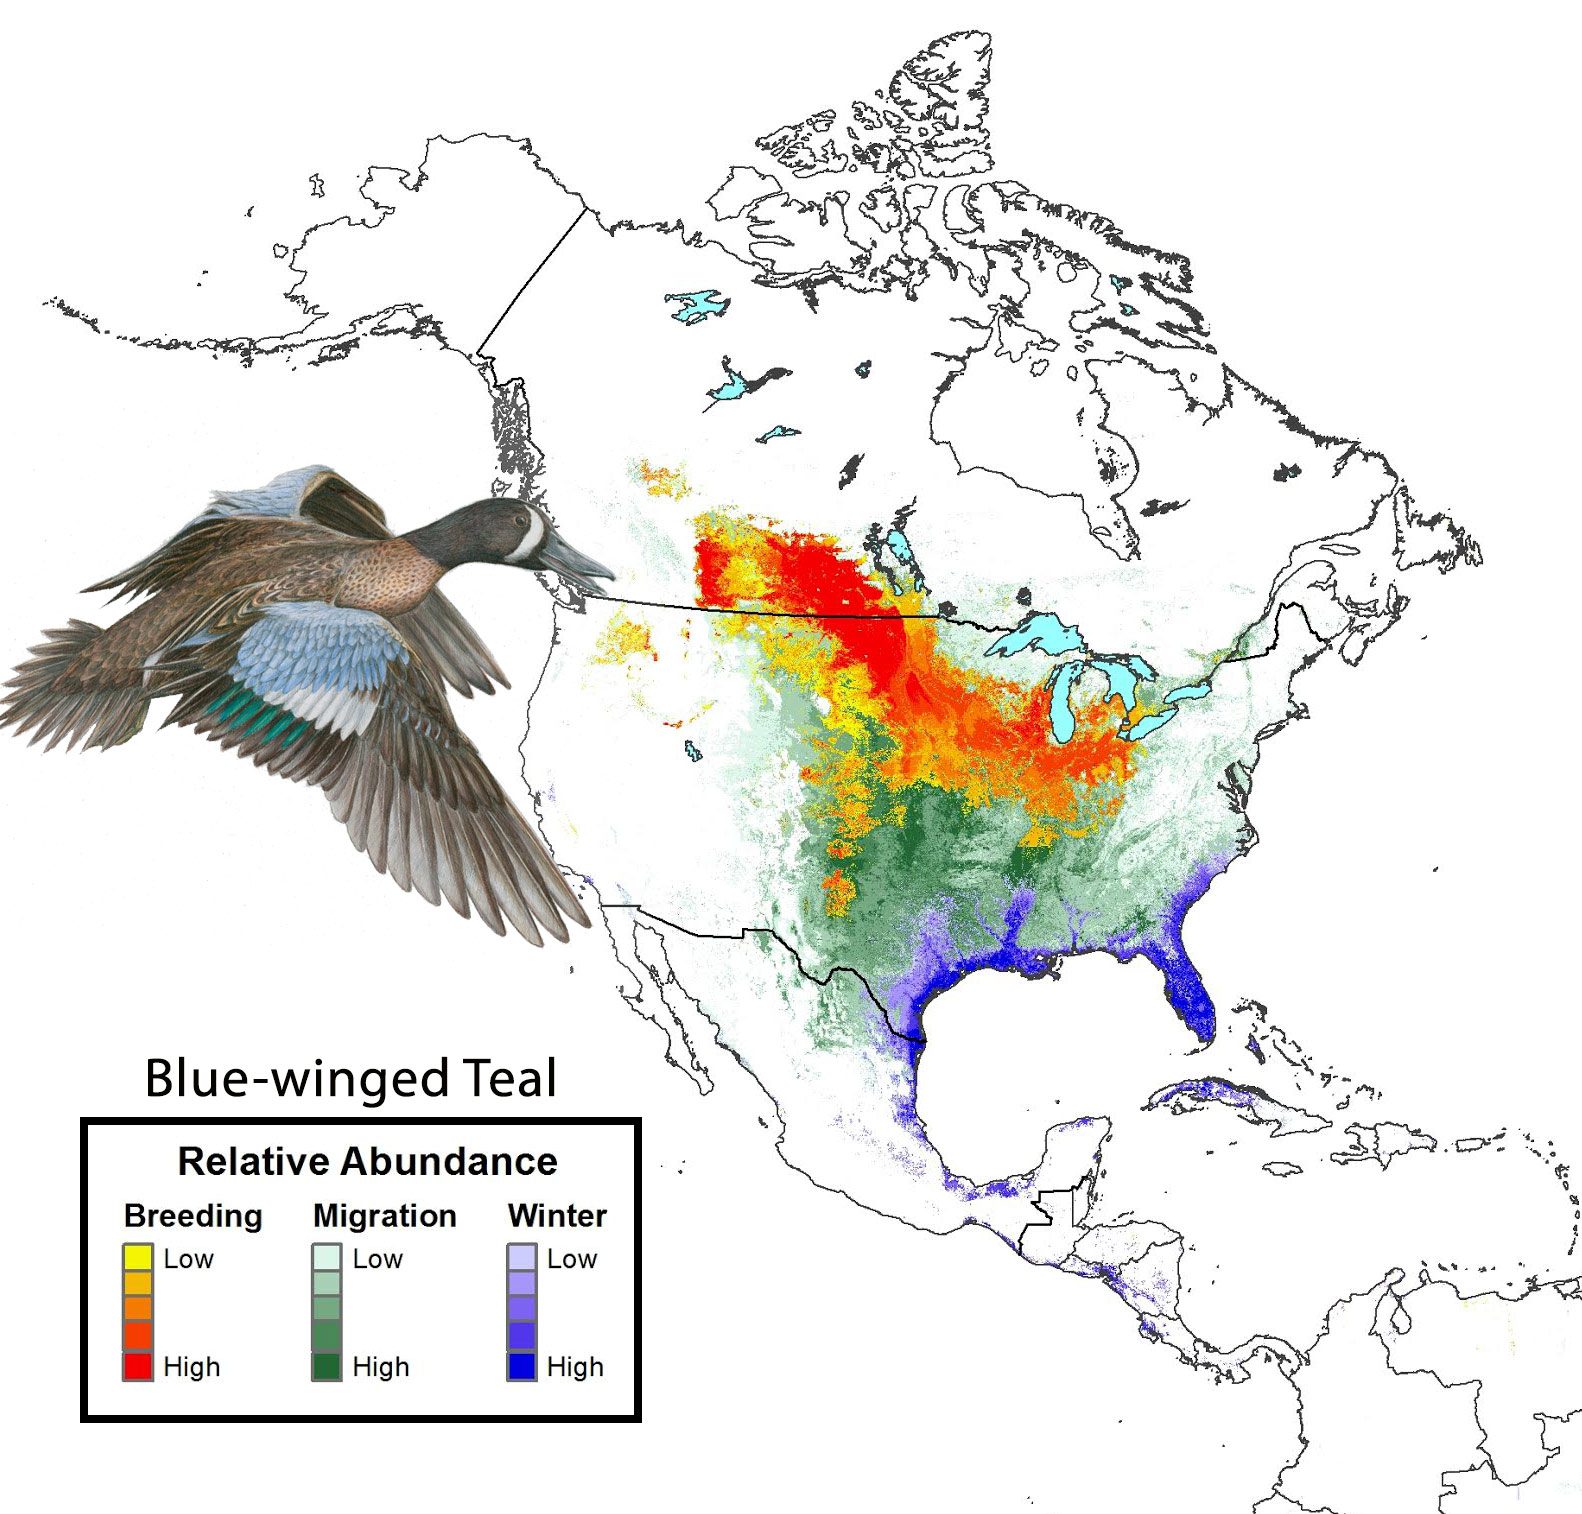 Year-round species abundance map for Blue-winged Teal.